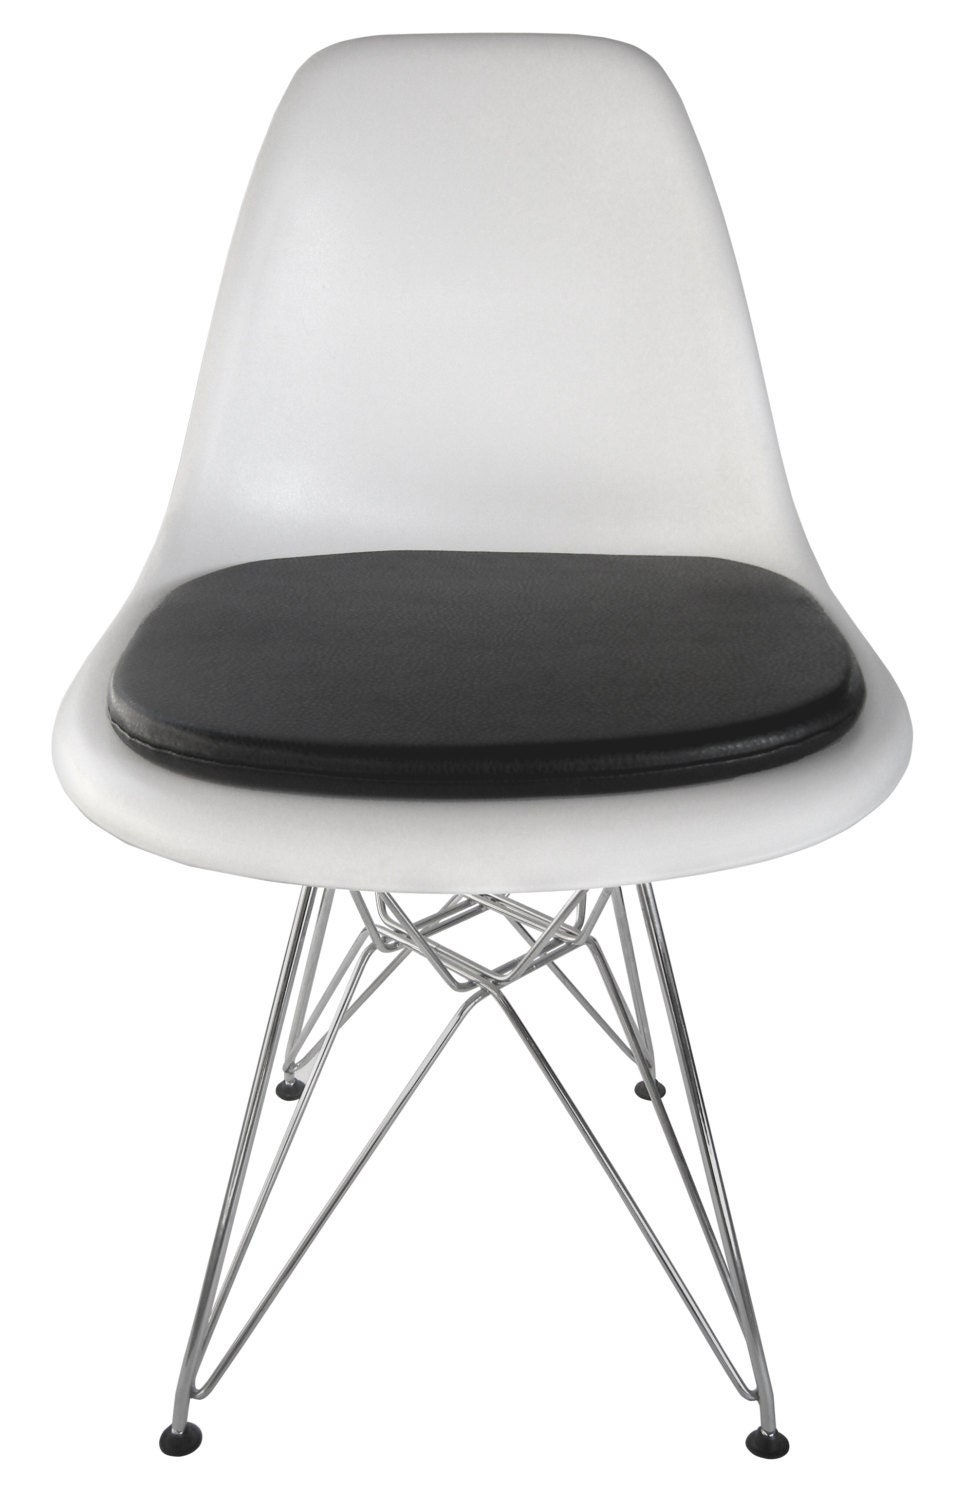 Chair Seat Risers for Charles Eames, Black